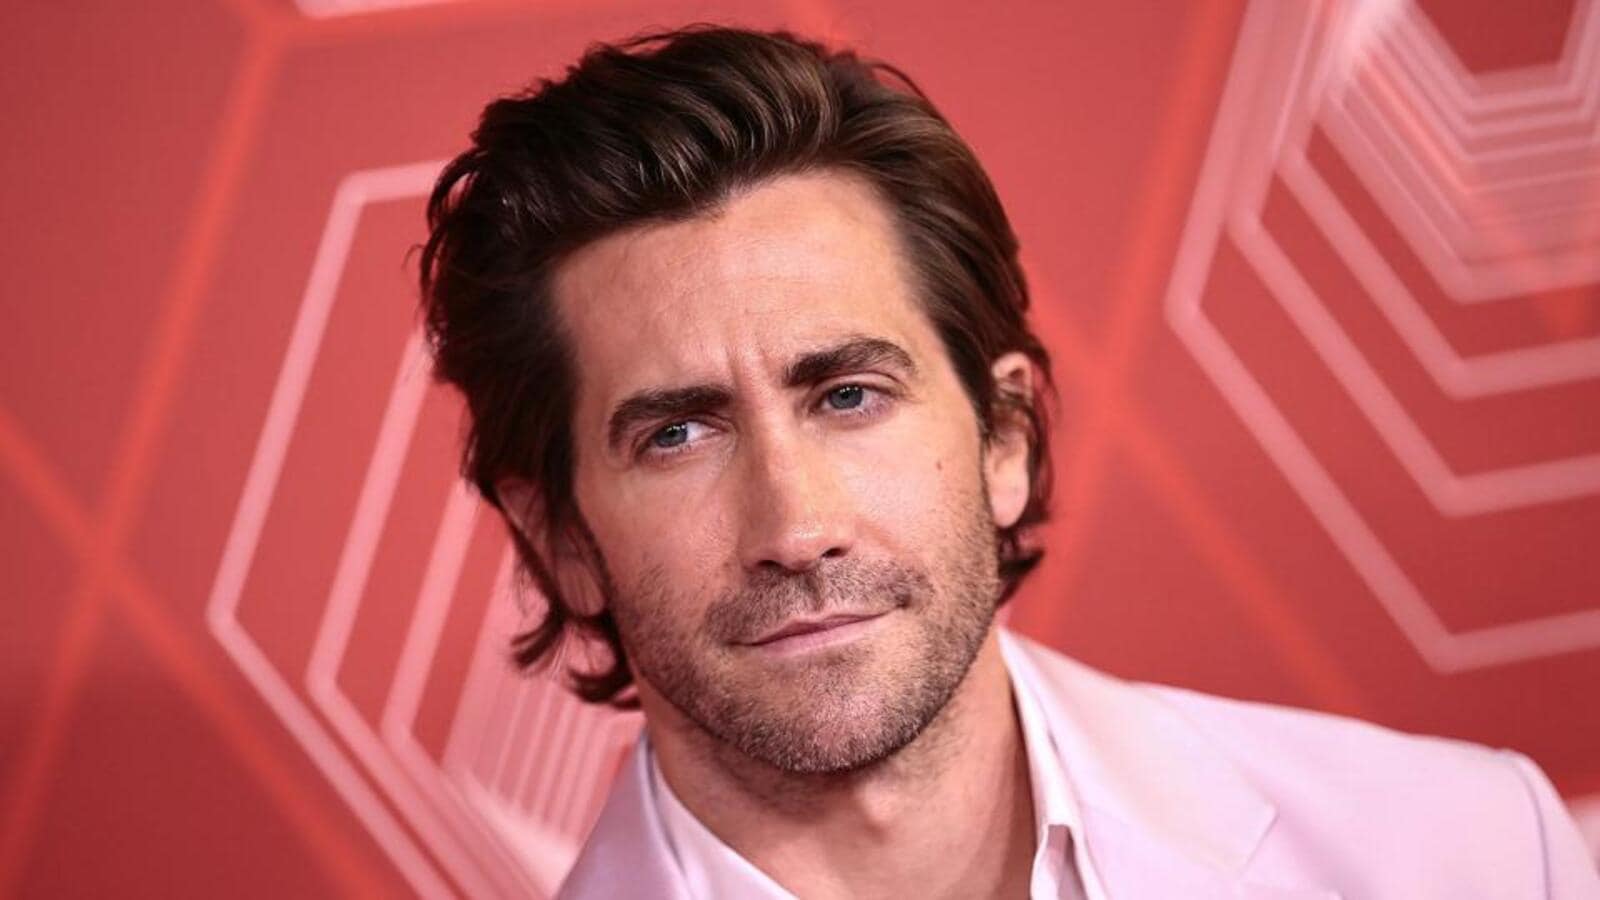 Jake Gyllenhaal: Skill of Bollywood actors is unsurpassed, we don’t have that in Hollywood